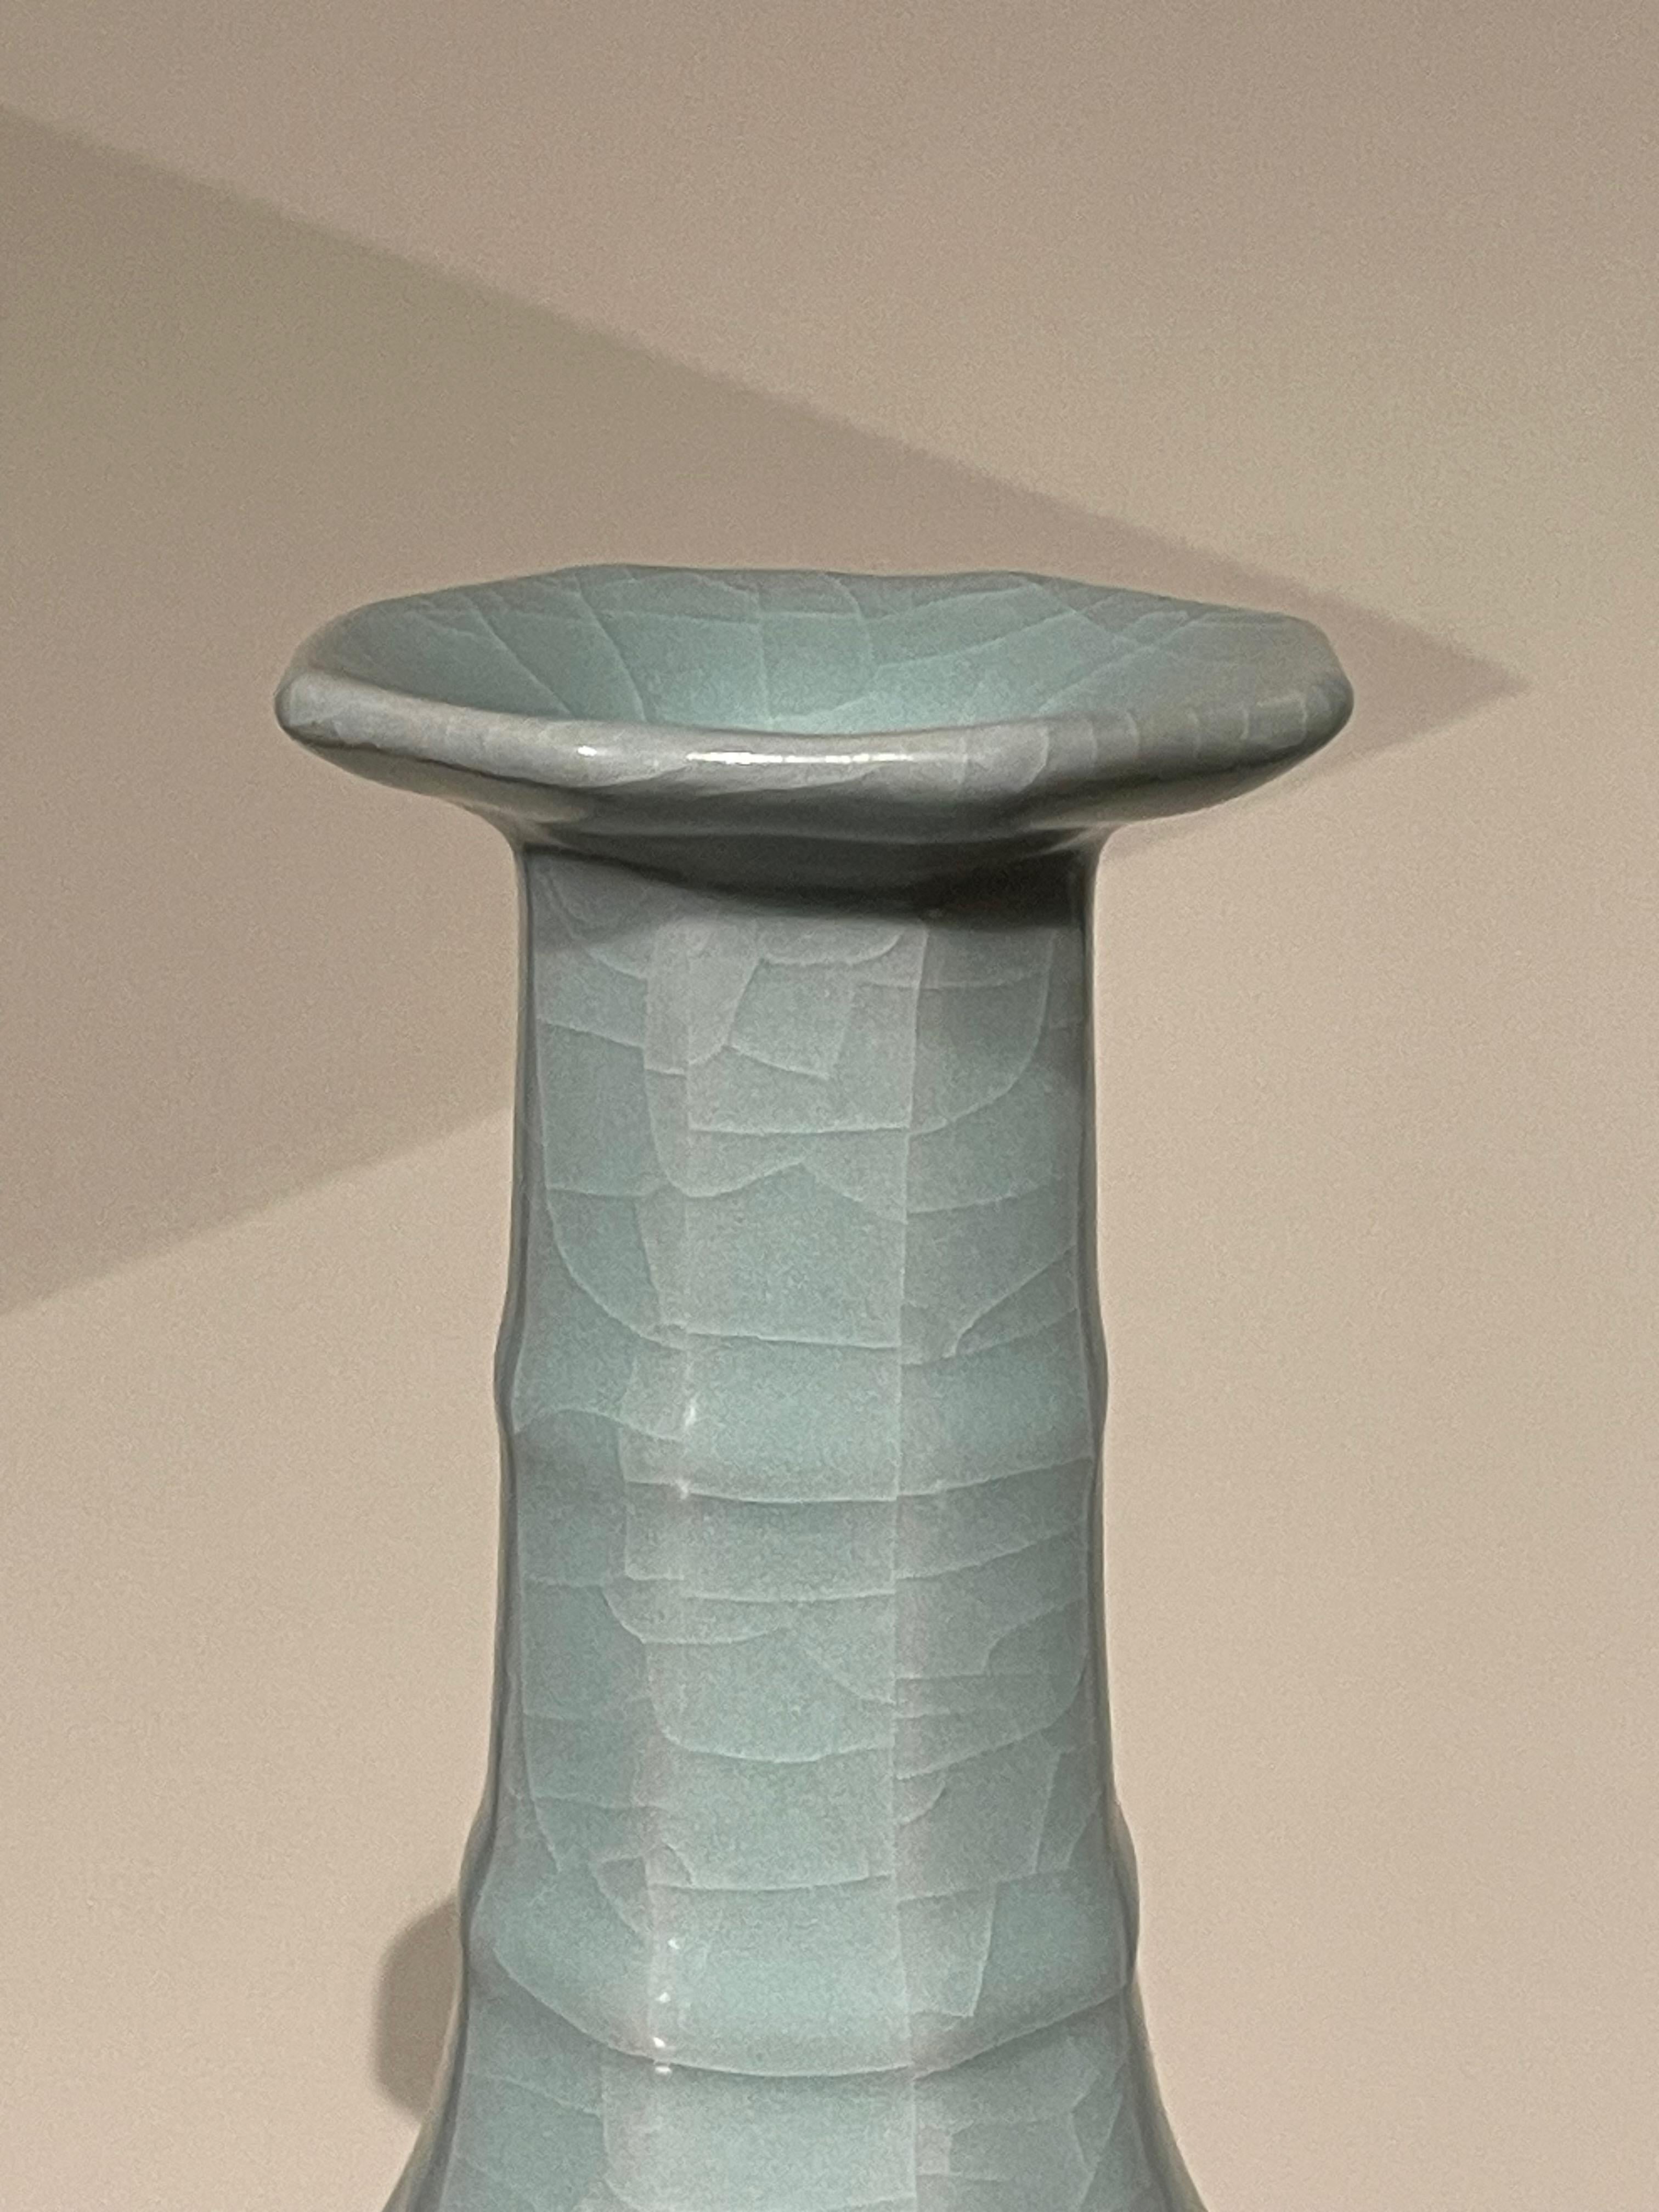 Contemporary Chinese pale turquoise vase.
Octagonal shape with ribbed details on elongated neck.
Large collection available with varying sizes and shapes.
ARRIVING MARCH